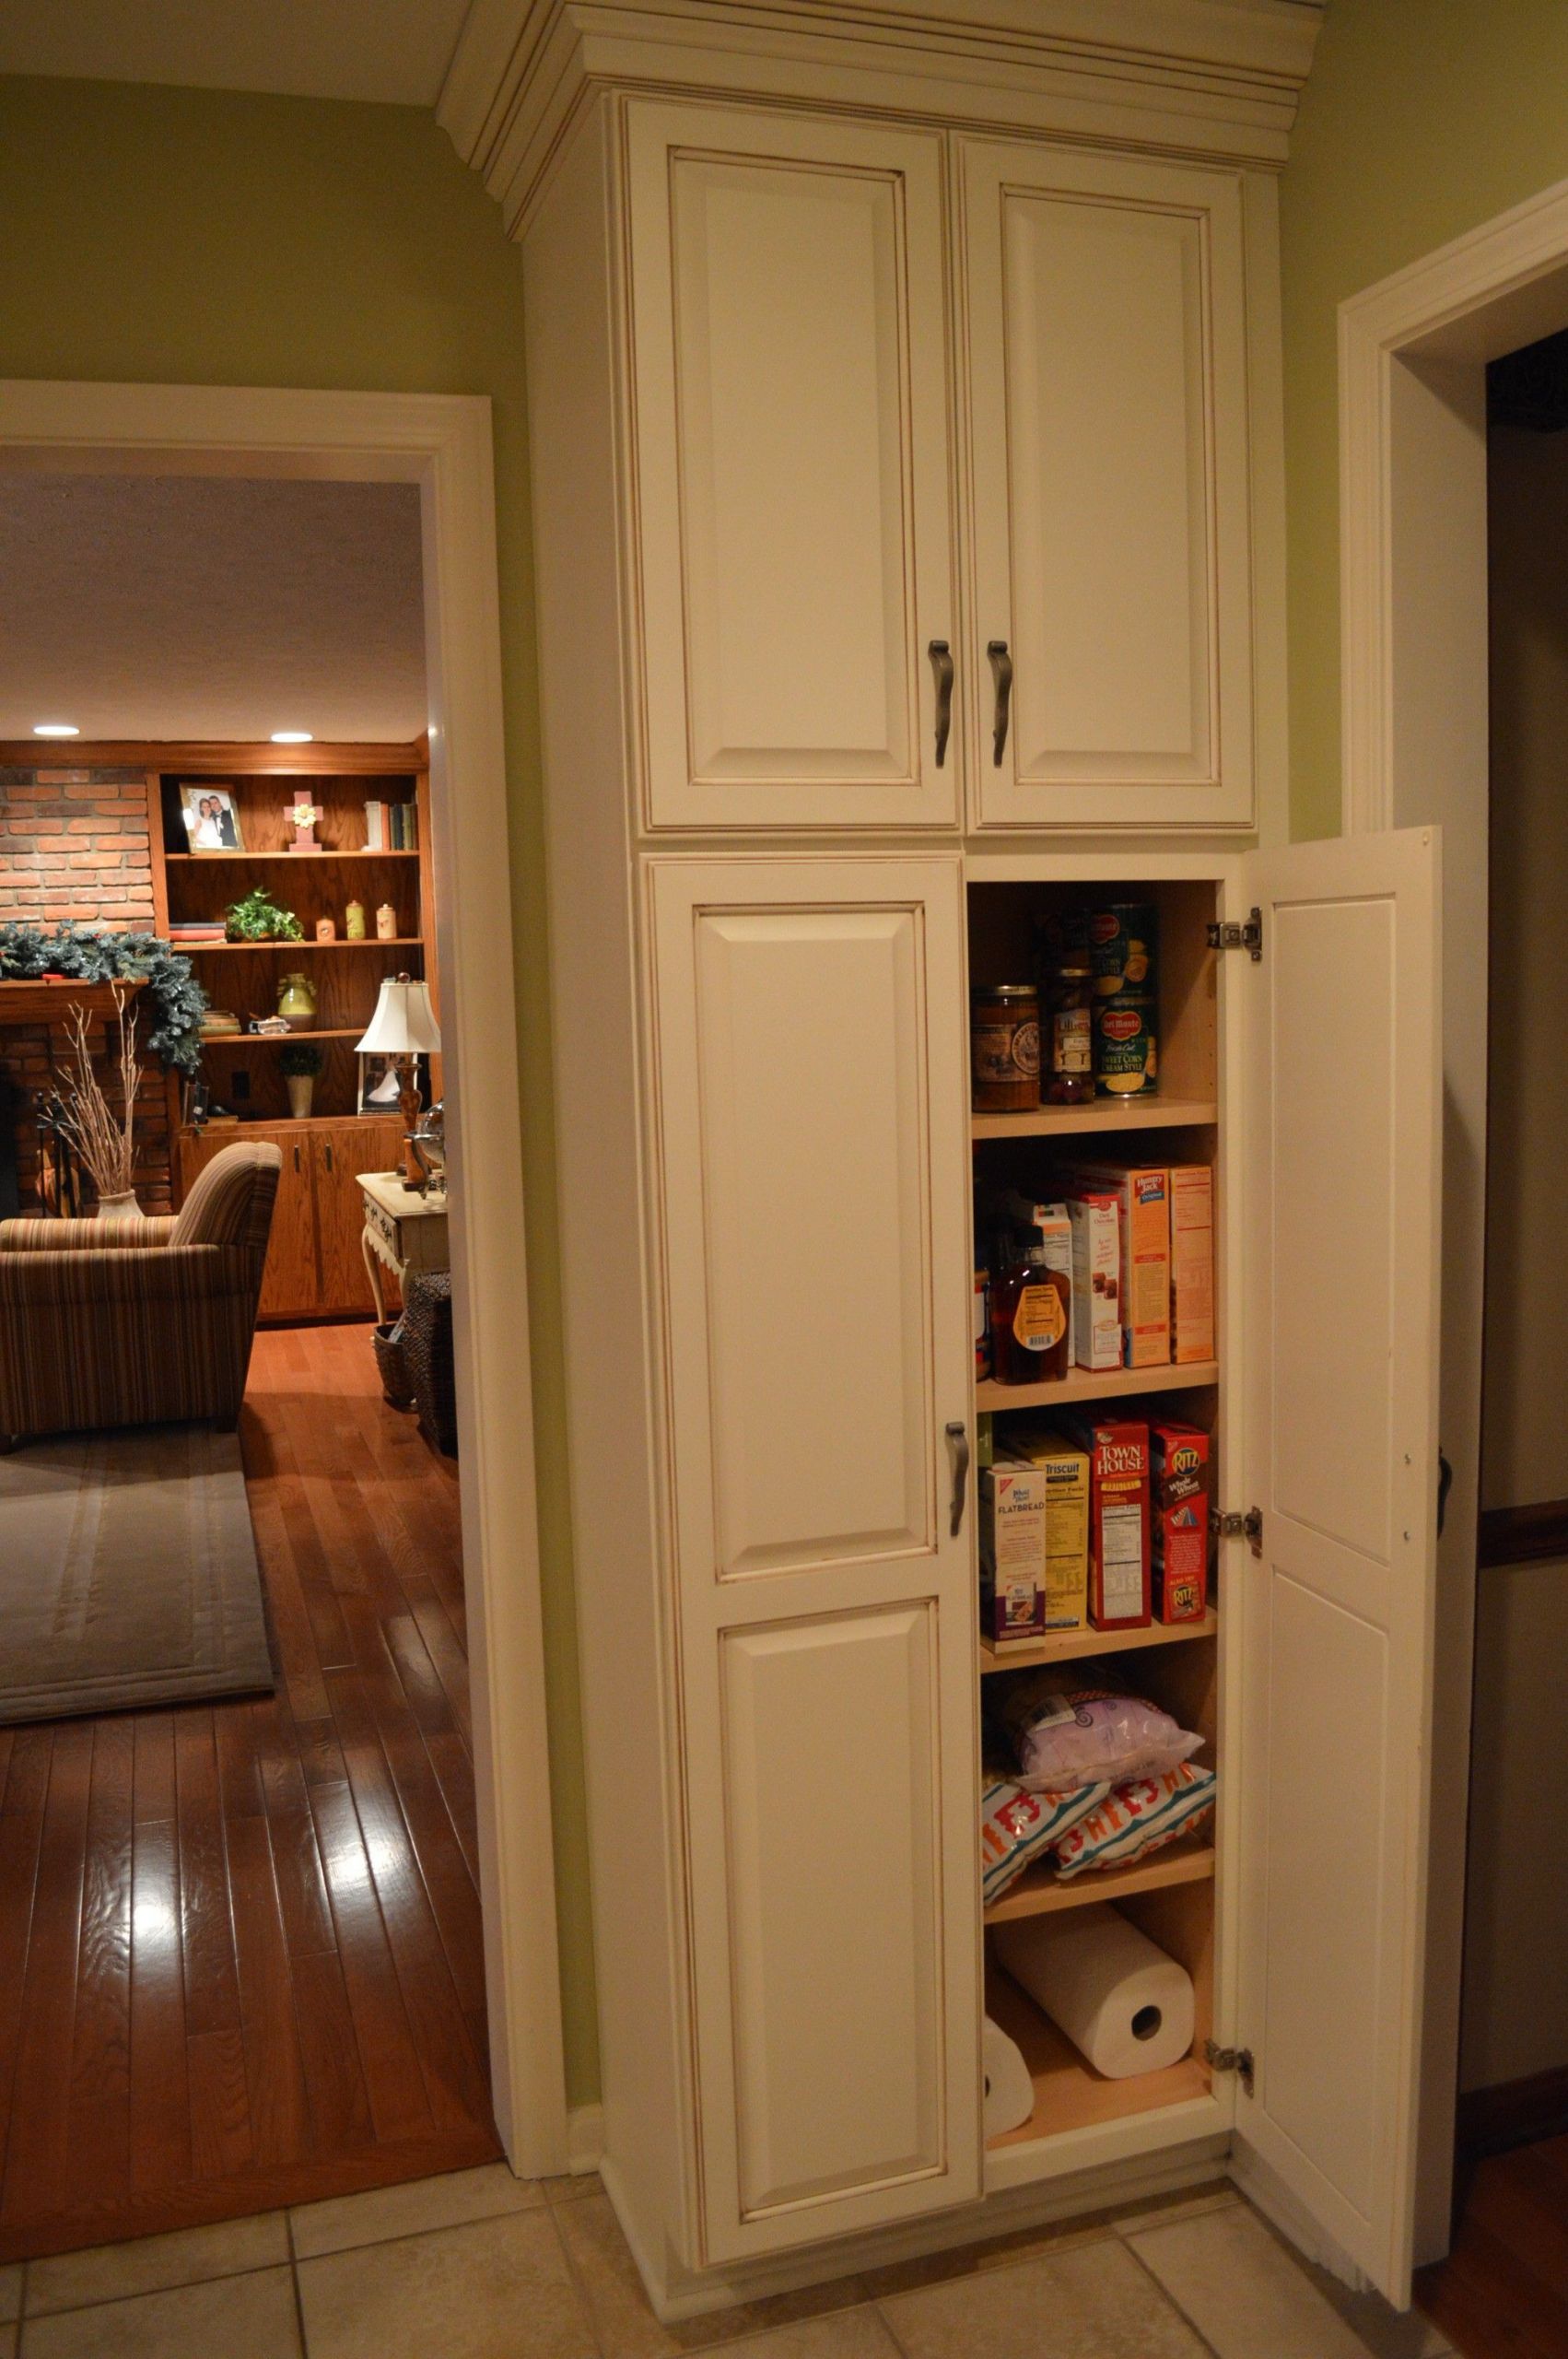 White Kitchen Pantry Freestanding
 F White Wooden Tall Narrow Pantry Cabinet With Maple Wood